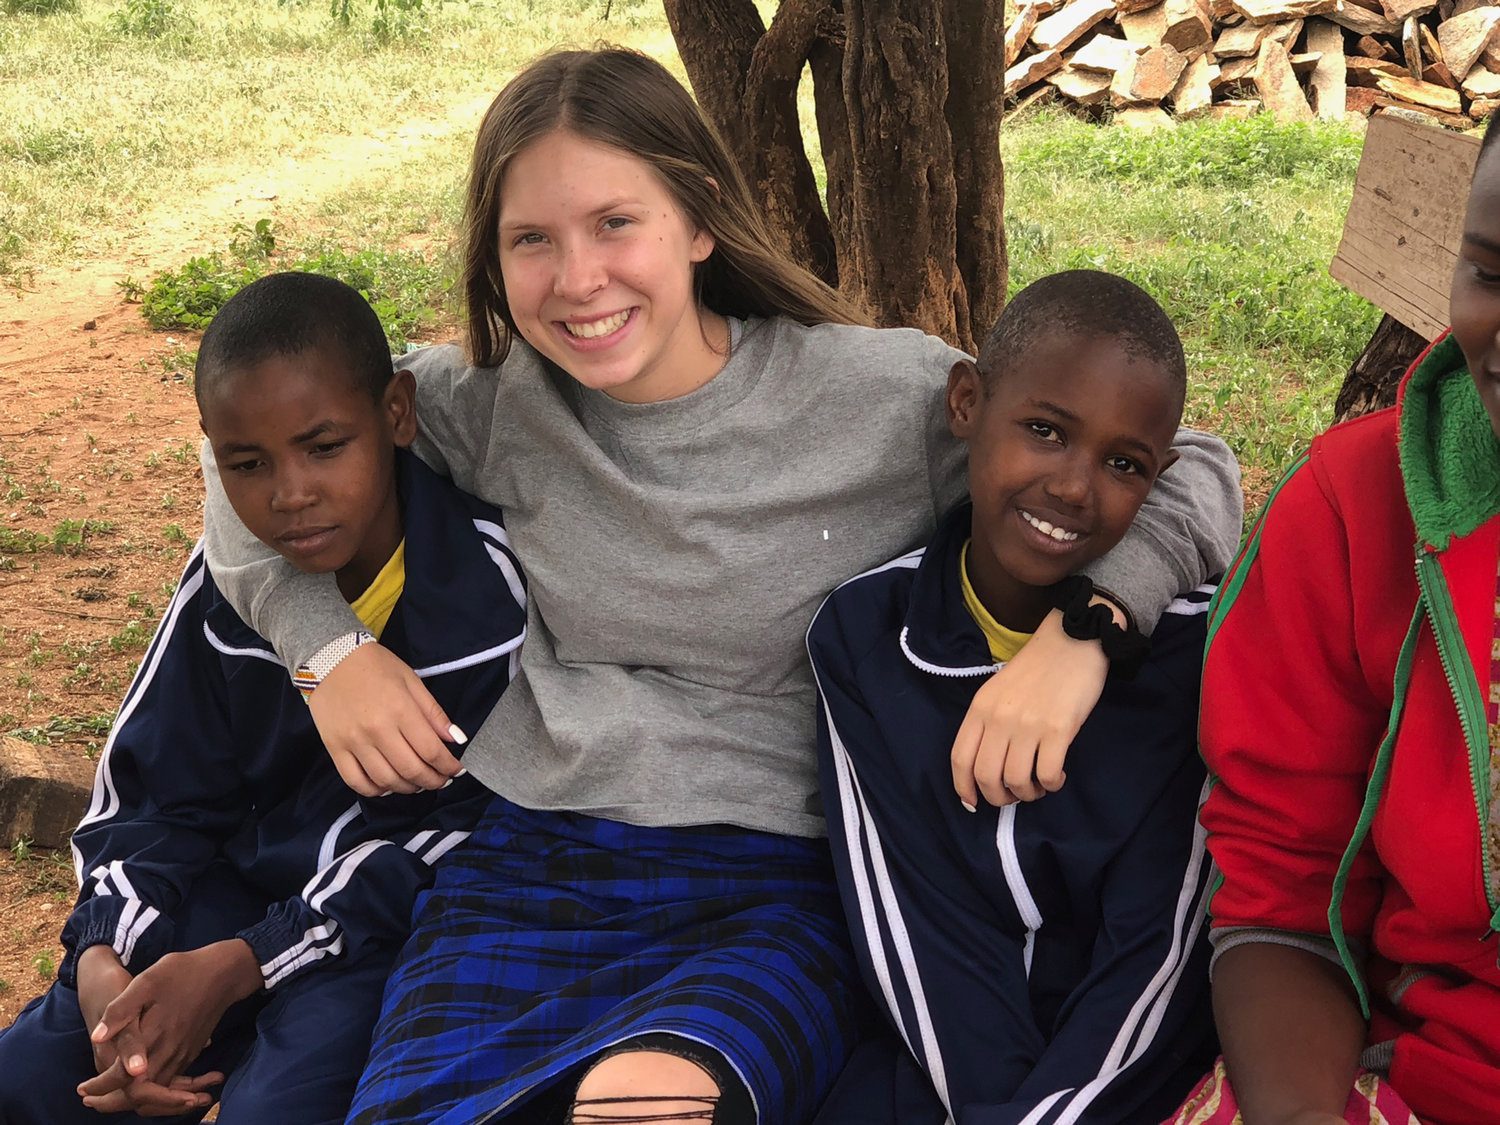 Makayla Henwood with two girls at the Maasai Girls Rescue Center in Tanzania, where she volunteered in 2019 and will serve again this summer.